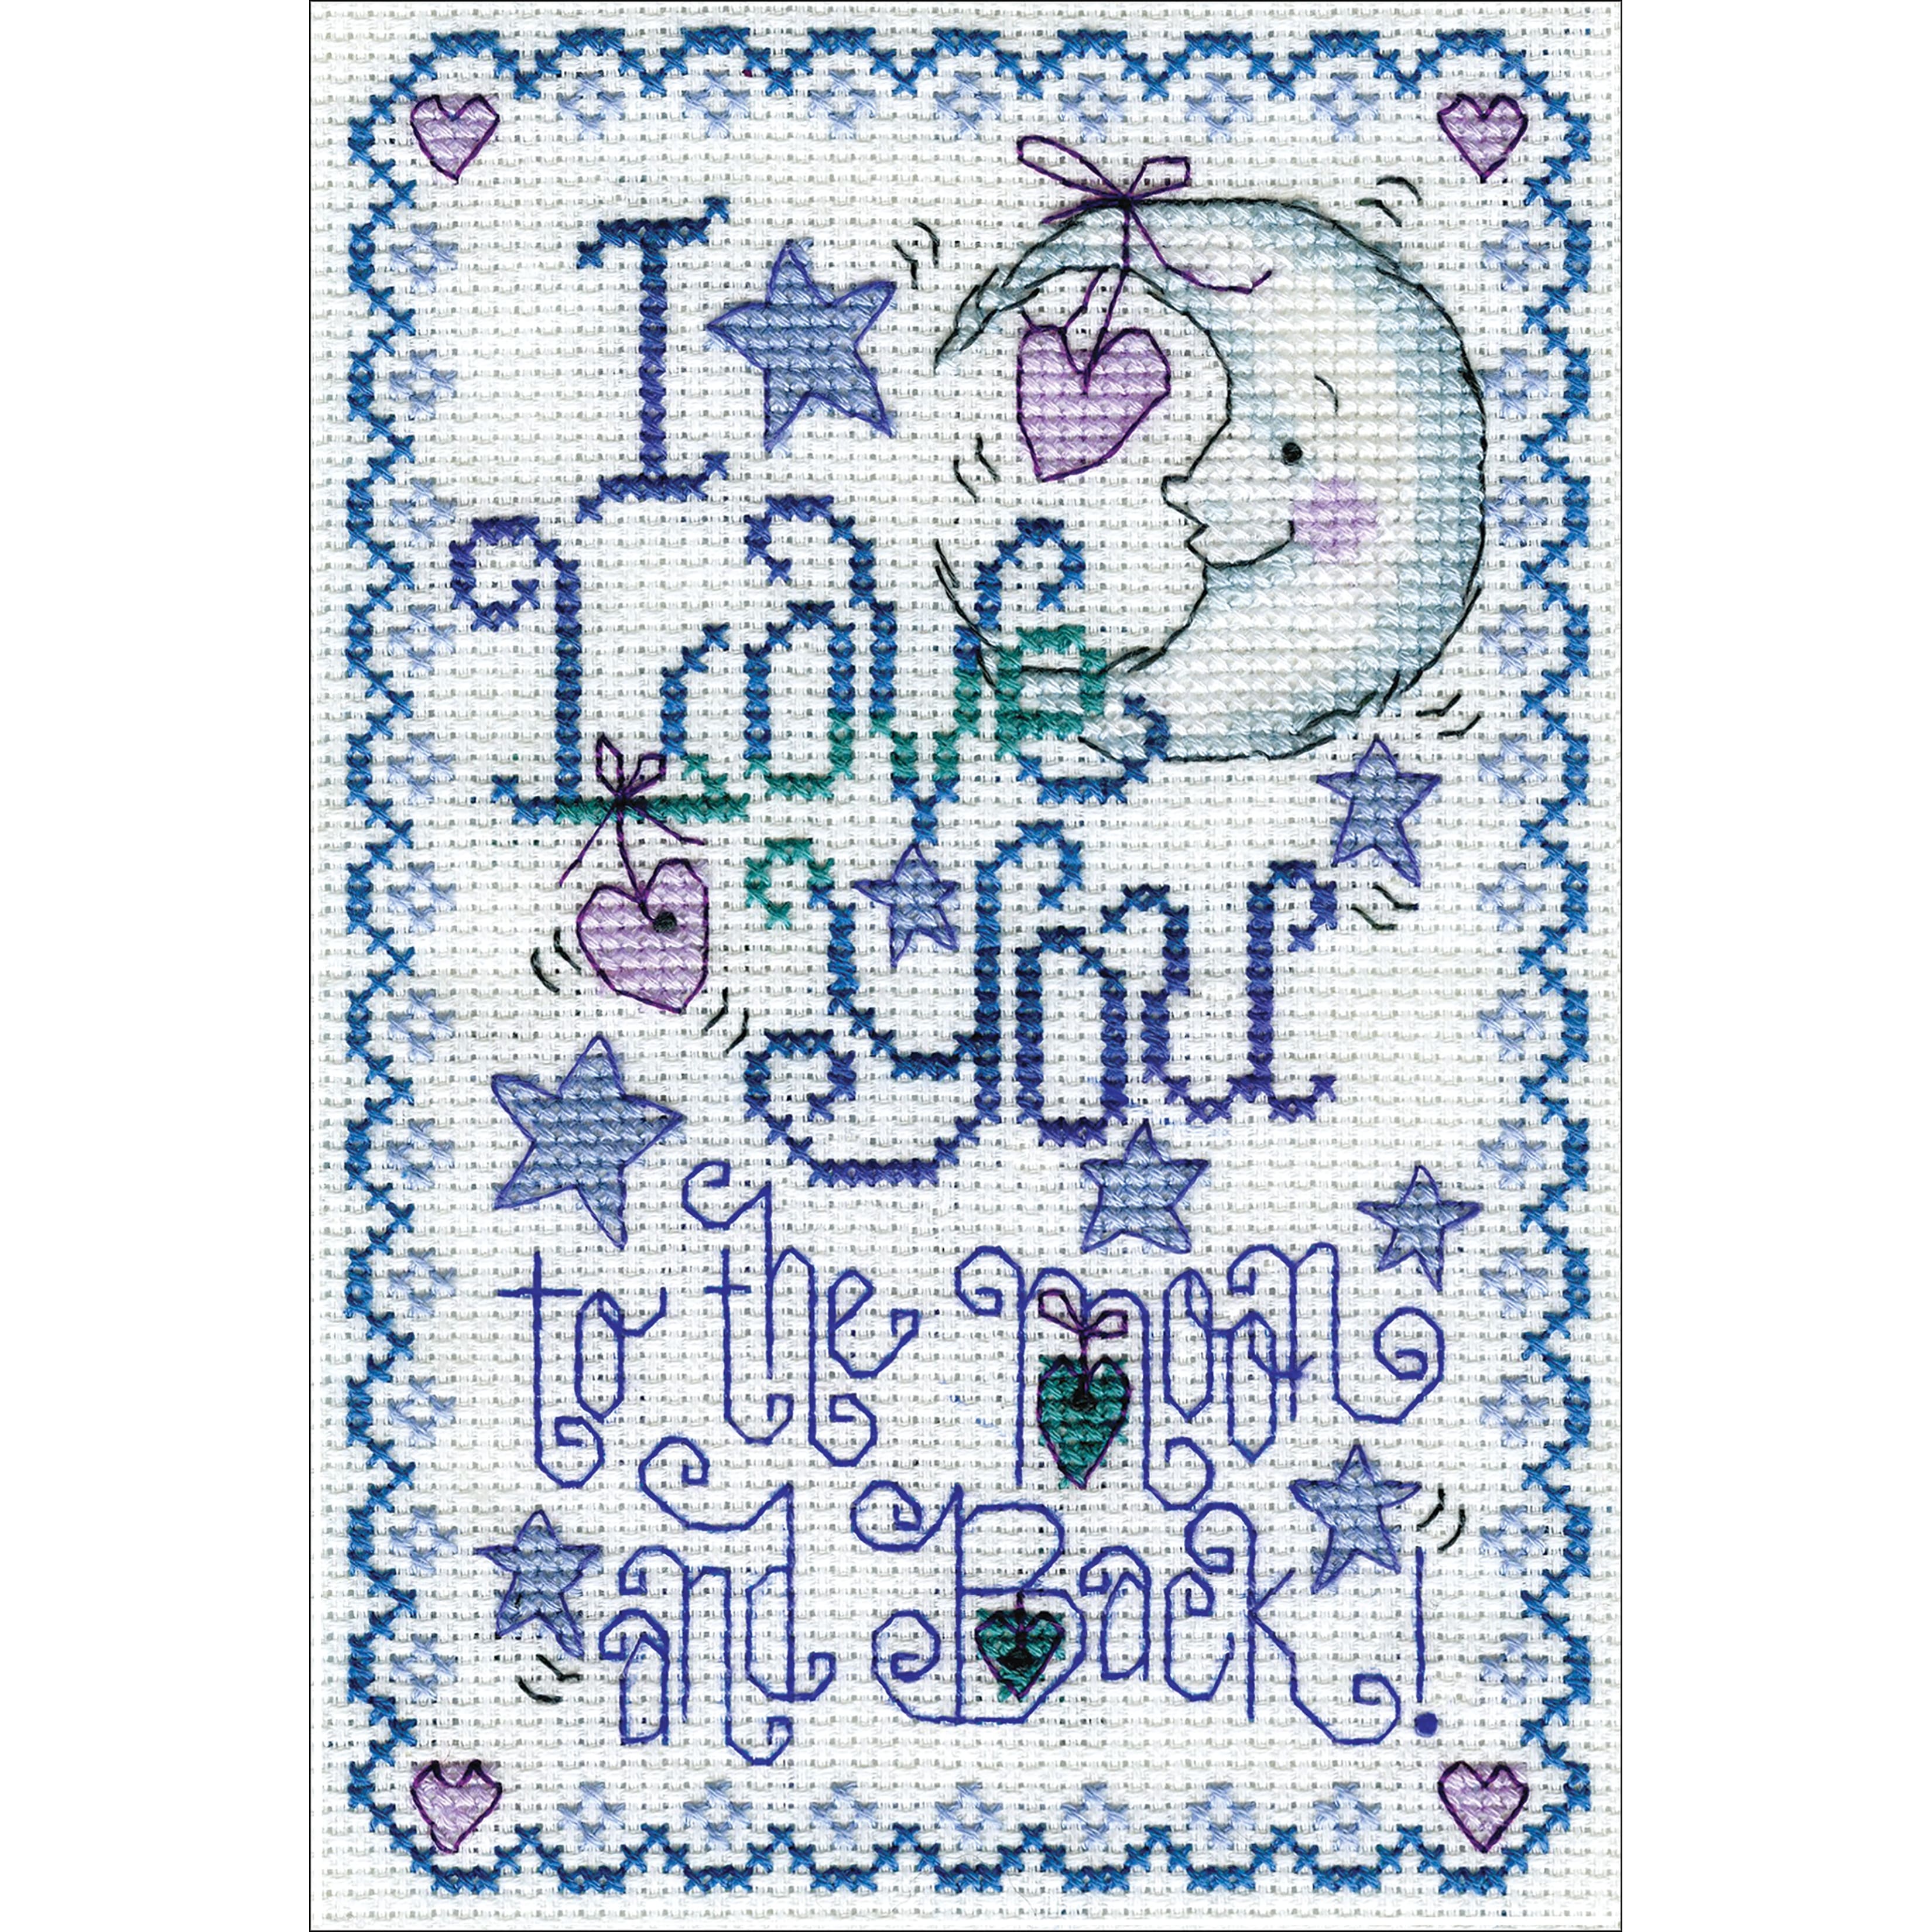 Design Works&#x2122; To The Moon Counted Cross Stitch Kit